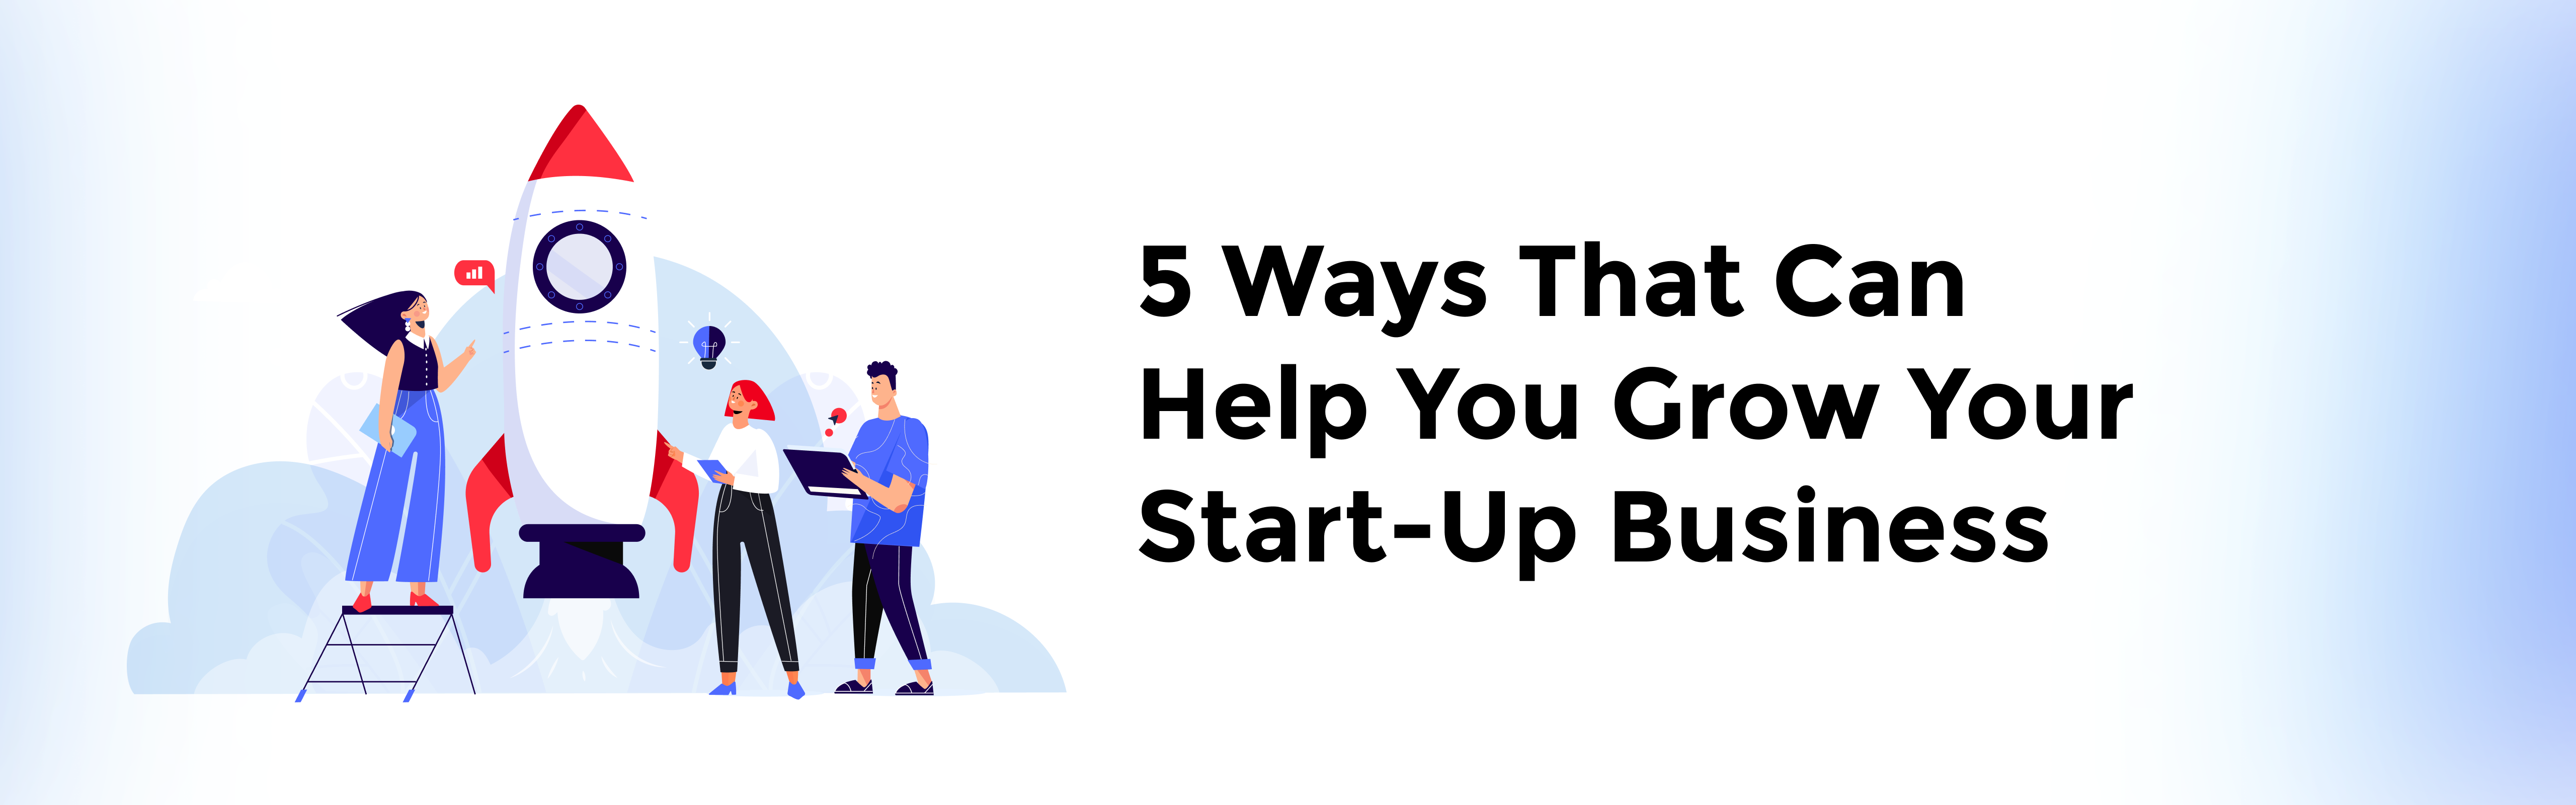 5-ways-that-can-help-you-grow-your-start-up-business-